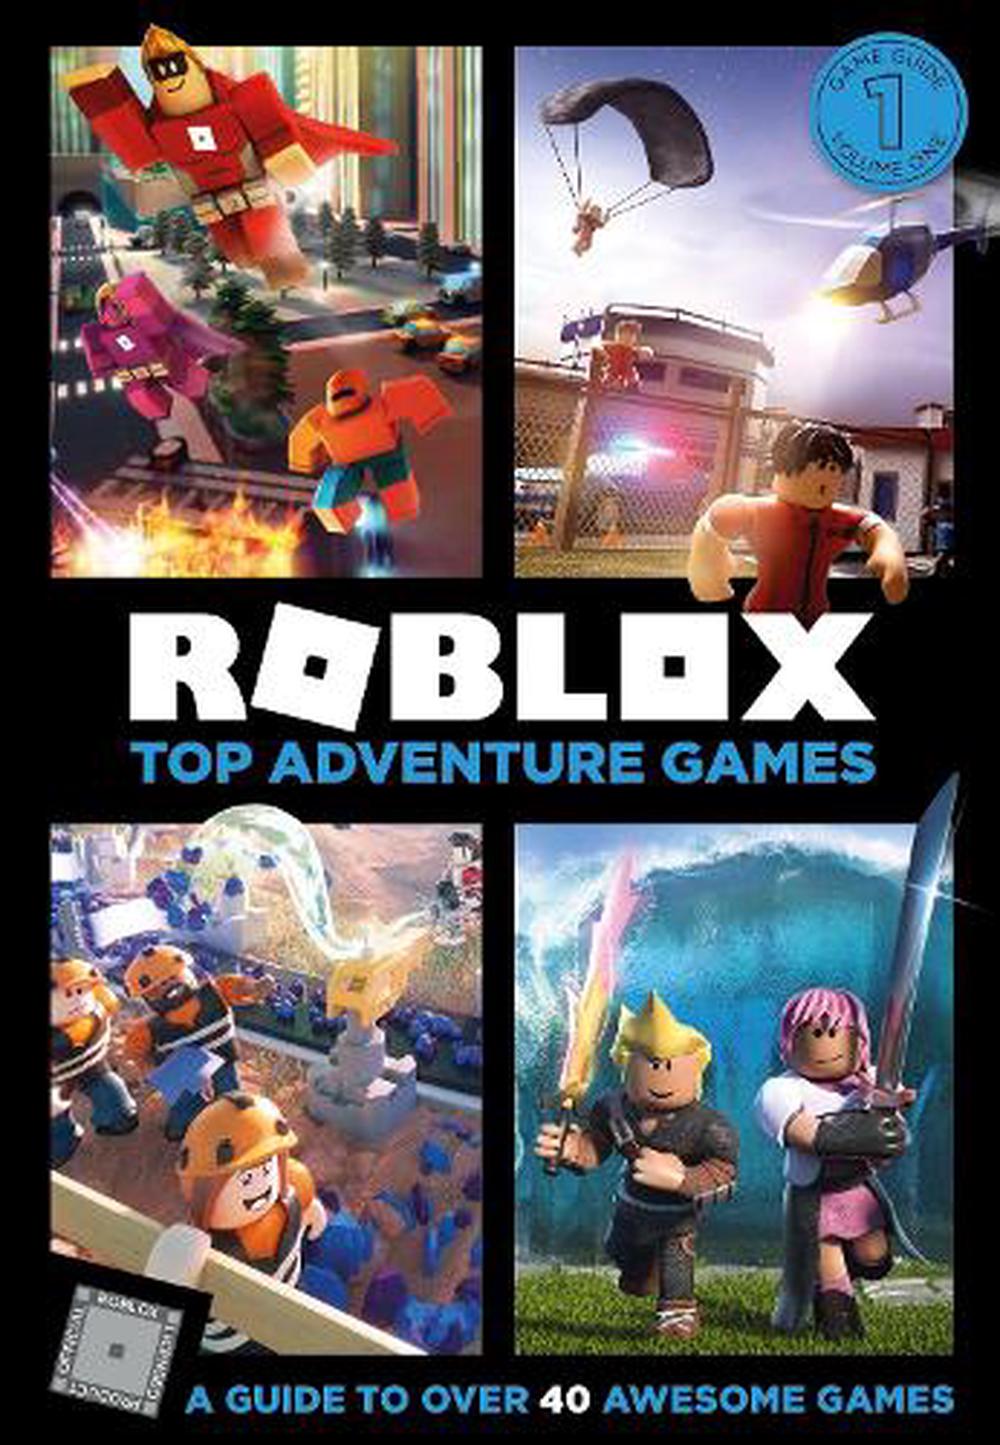 Roblox Top Adventure Games By Egmont Publishing Uk Hardcover 9781405291590 Buy Online At The Nile - roblox wheres the noob by uk egmont publishing